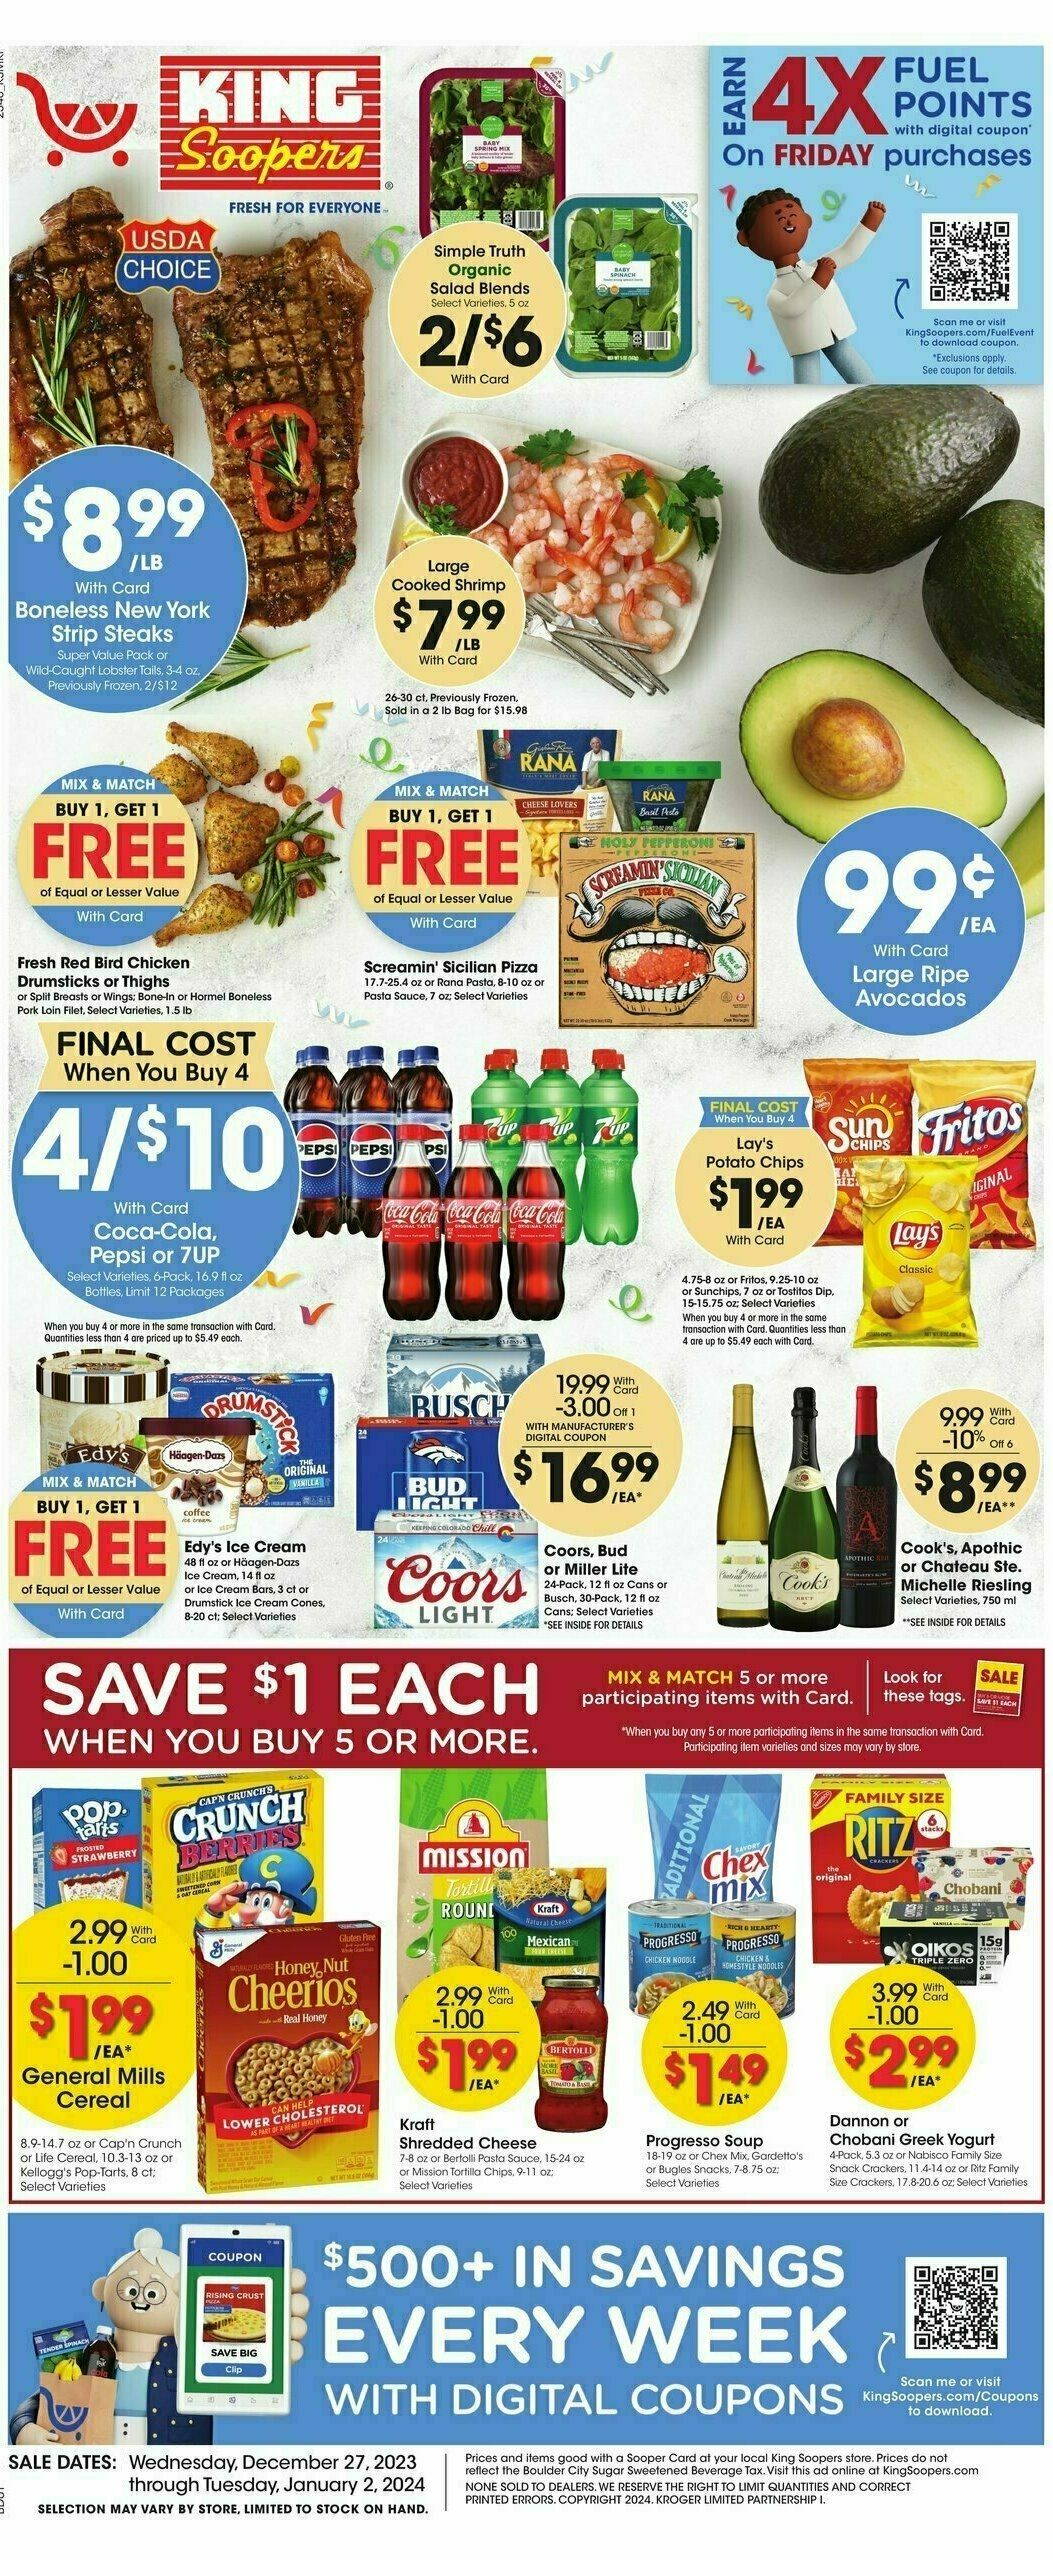 King Soopers Weekly Ad from December 27